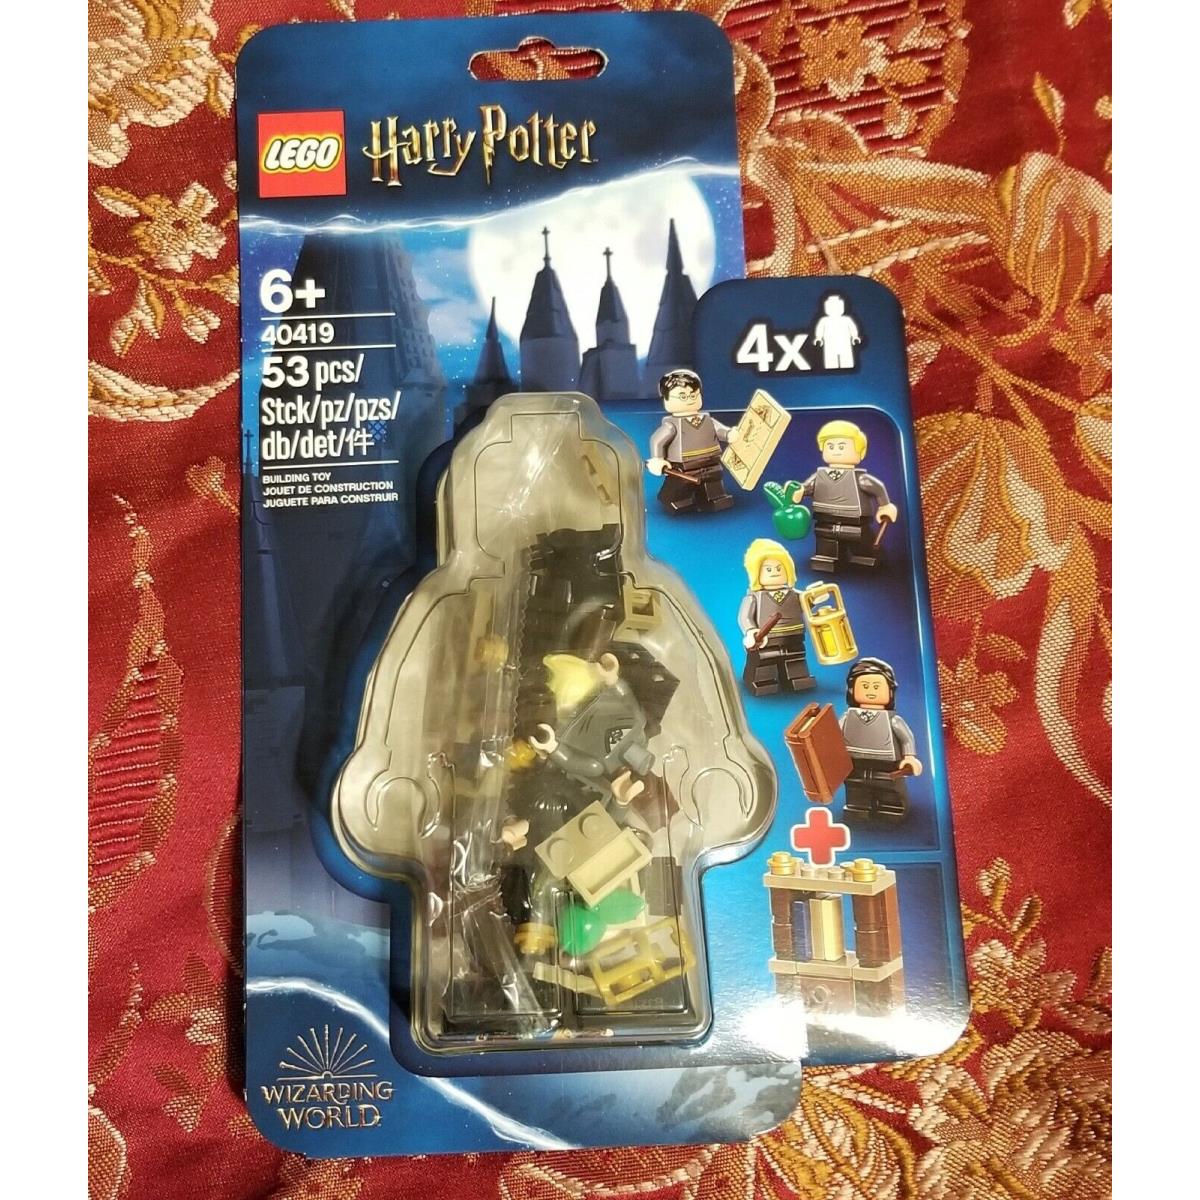 Lego 40419 Harry Potter Students Acc. Set Includes Cho Chang Package